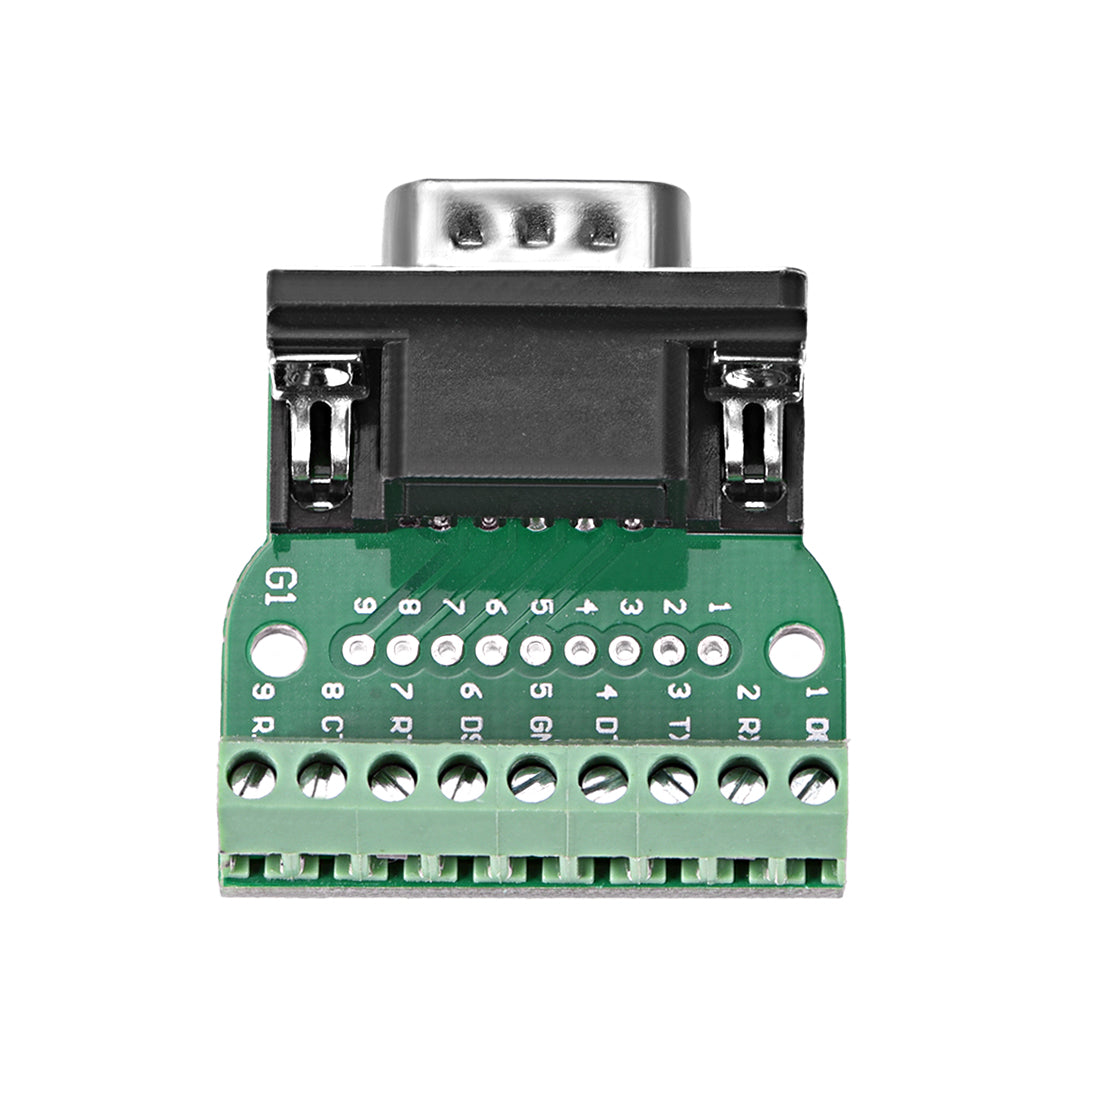 uxcell Uxcell D-sub DB9 Breakout Board Connector 9 Pin 2 Row Male RS232 Serial Port Solderless Terminal Block Adapter